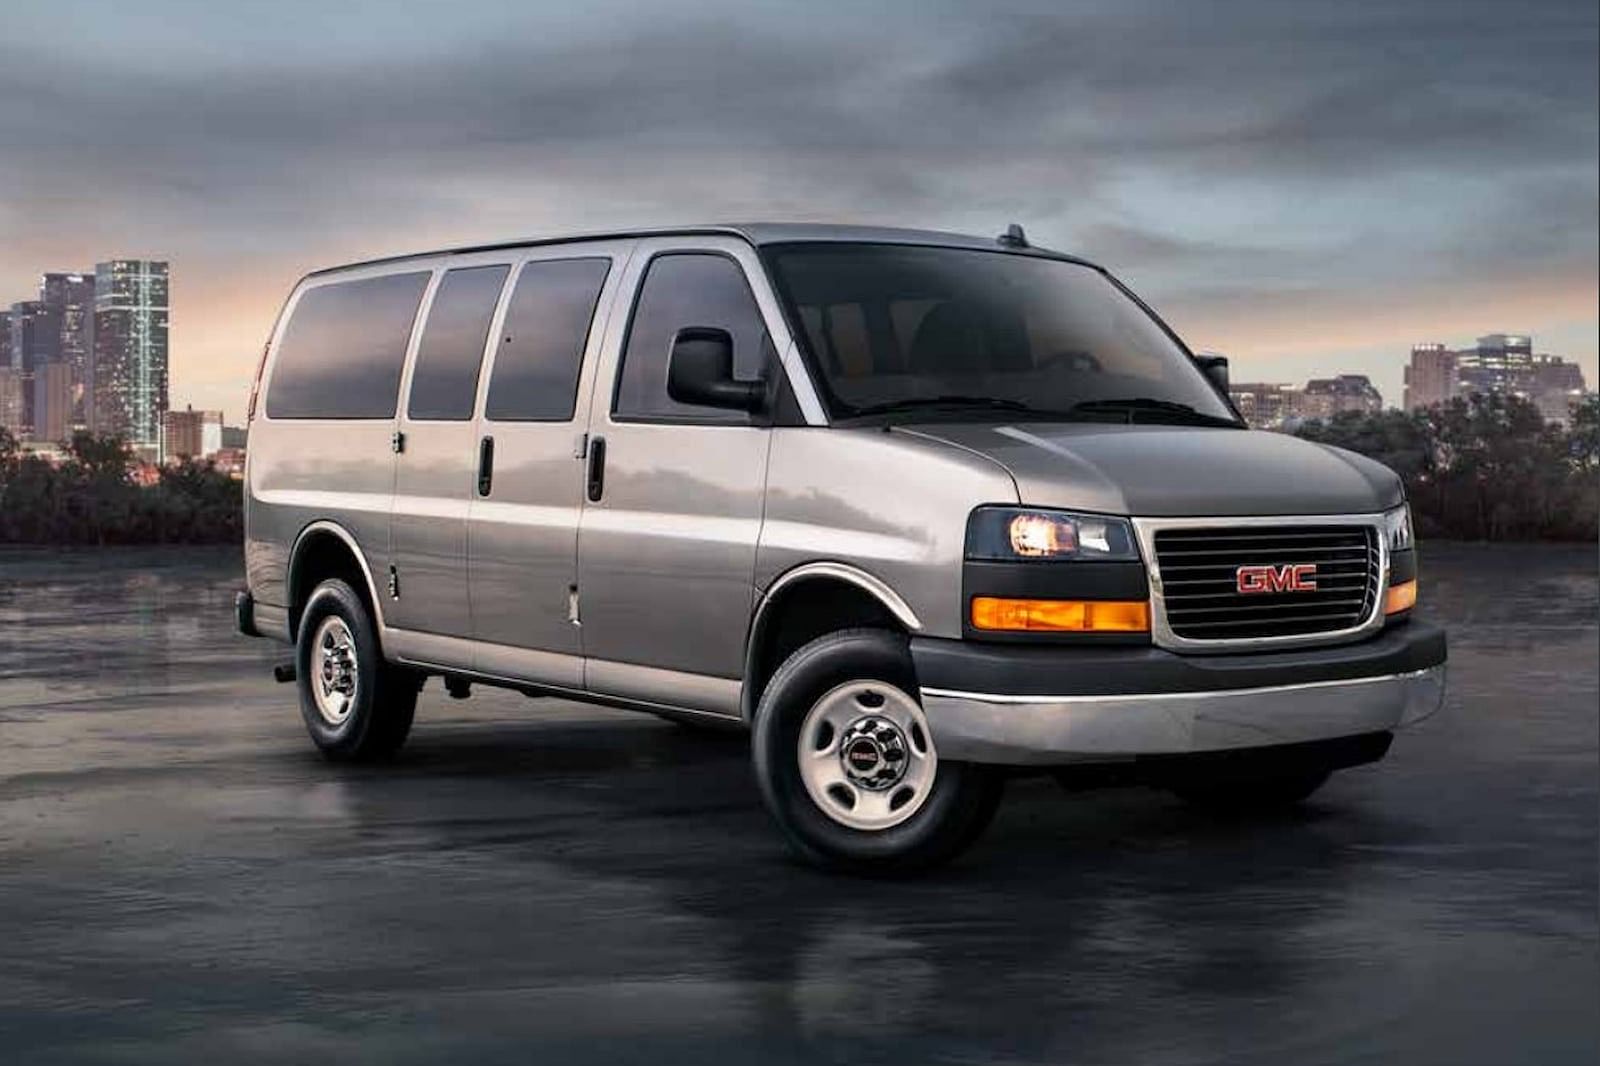 2012 GMC Savana Cargo Price, Review, Pictures and Cars for Sale | CARHP